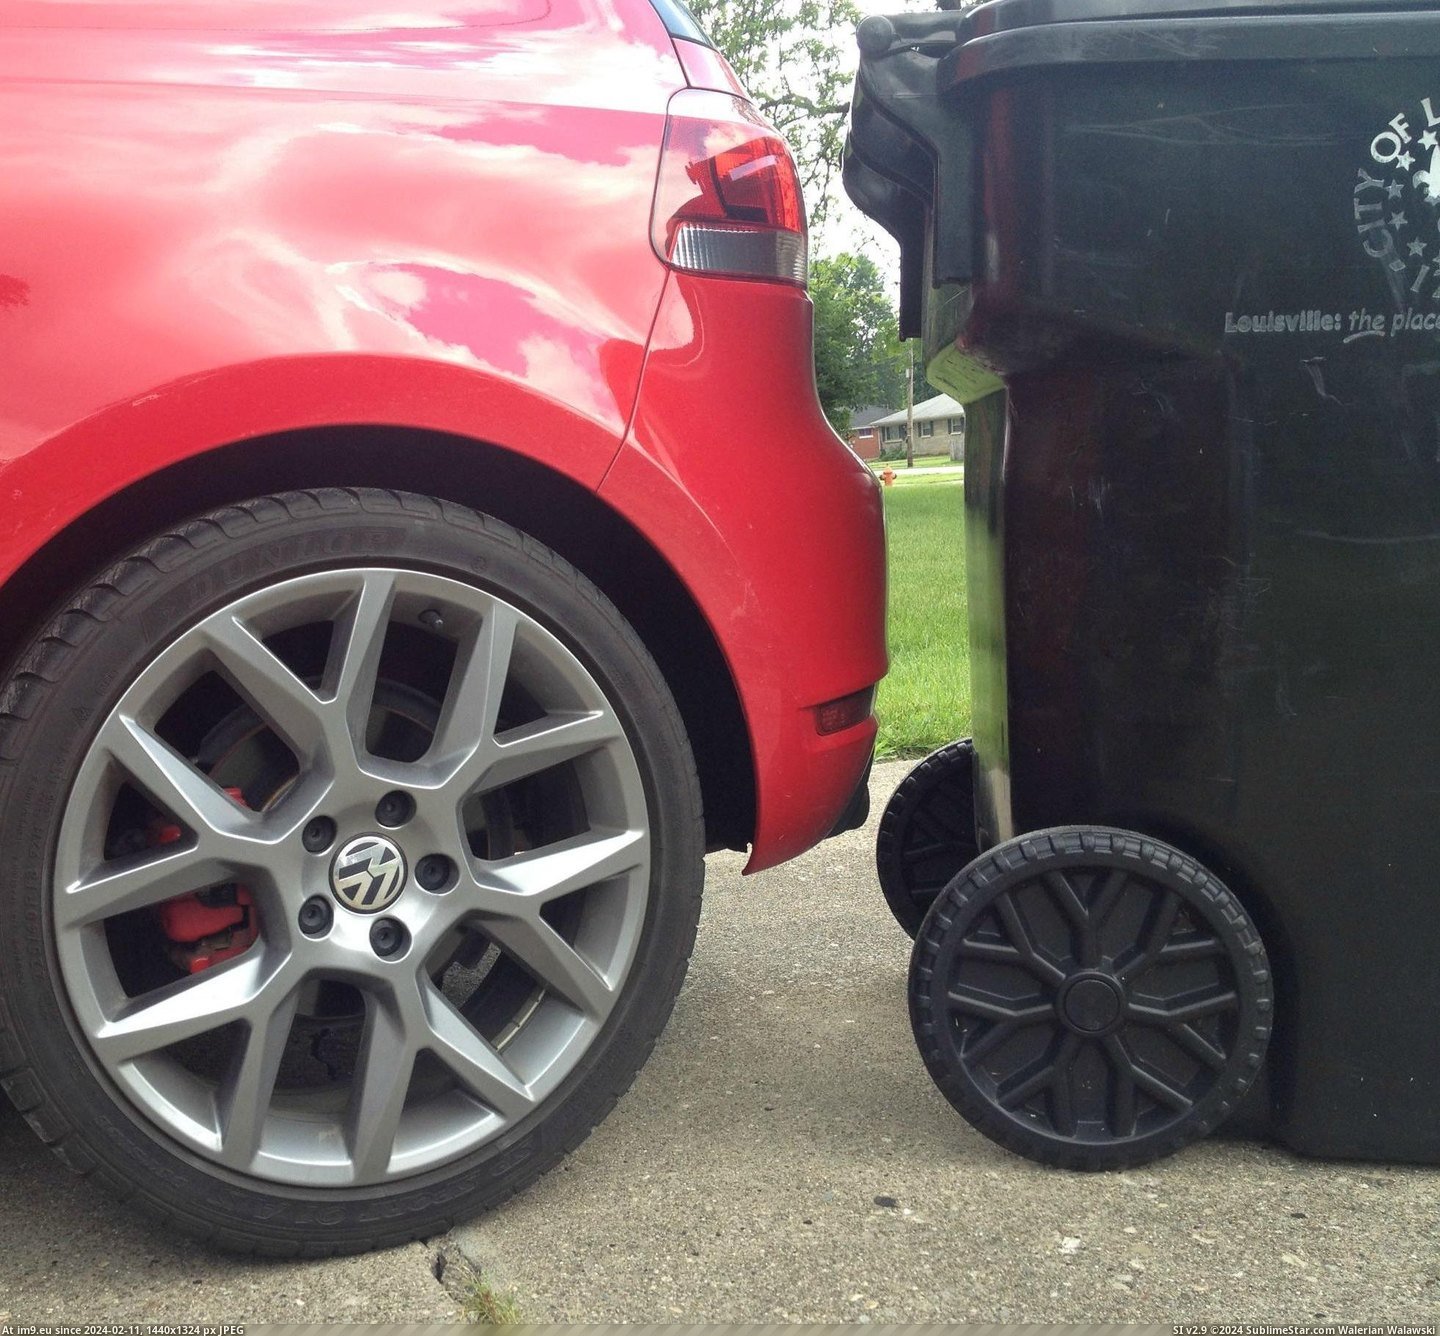 [Mildlyinteresting] My car and garbage can have the same wheels. (in My r/MILDLYINTERESTING favs)